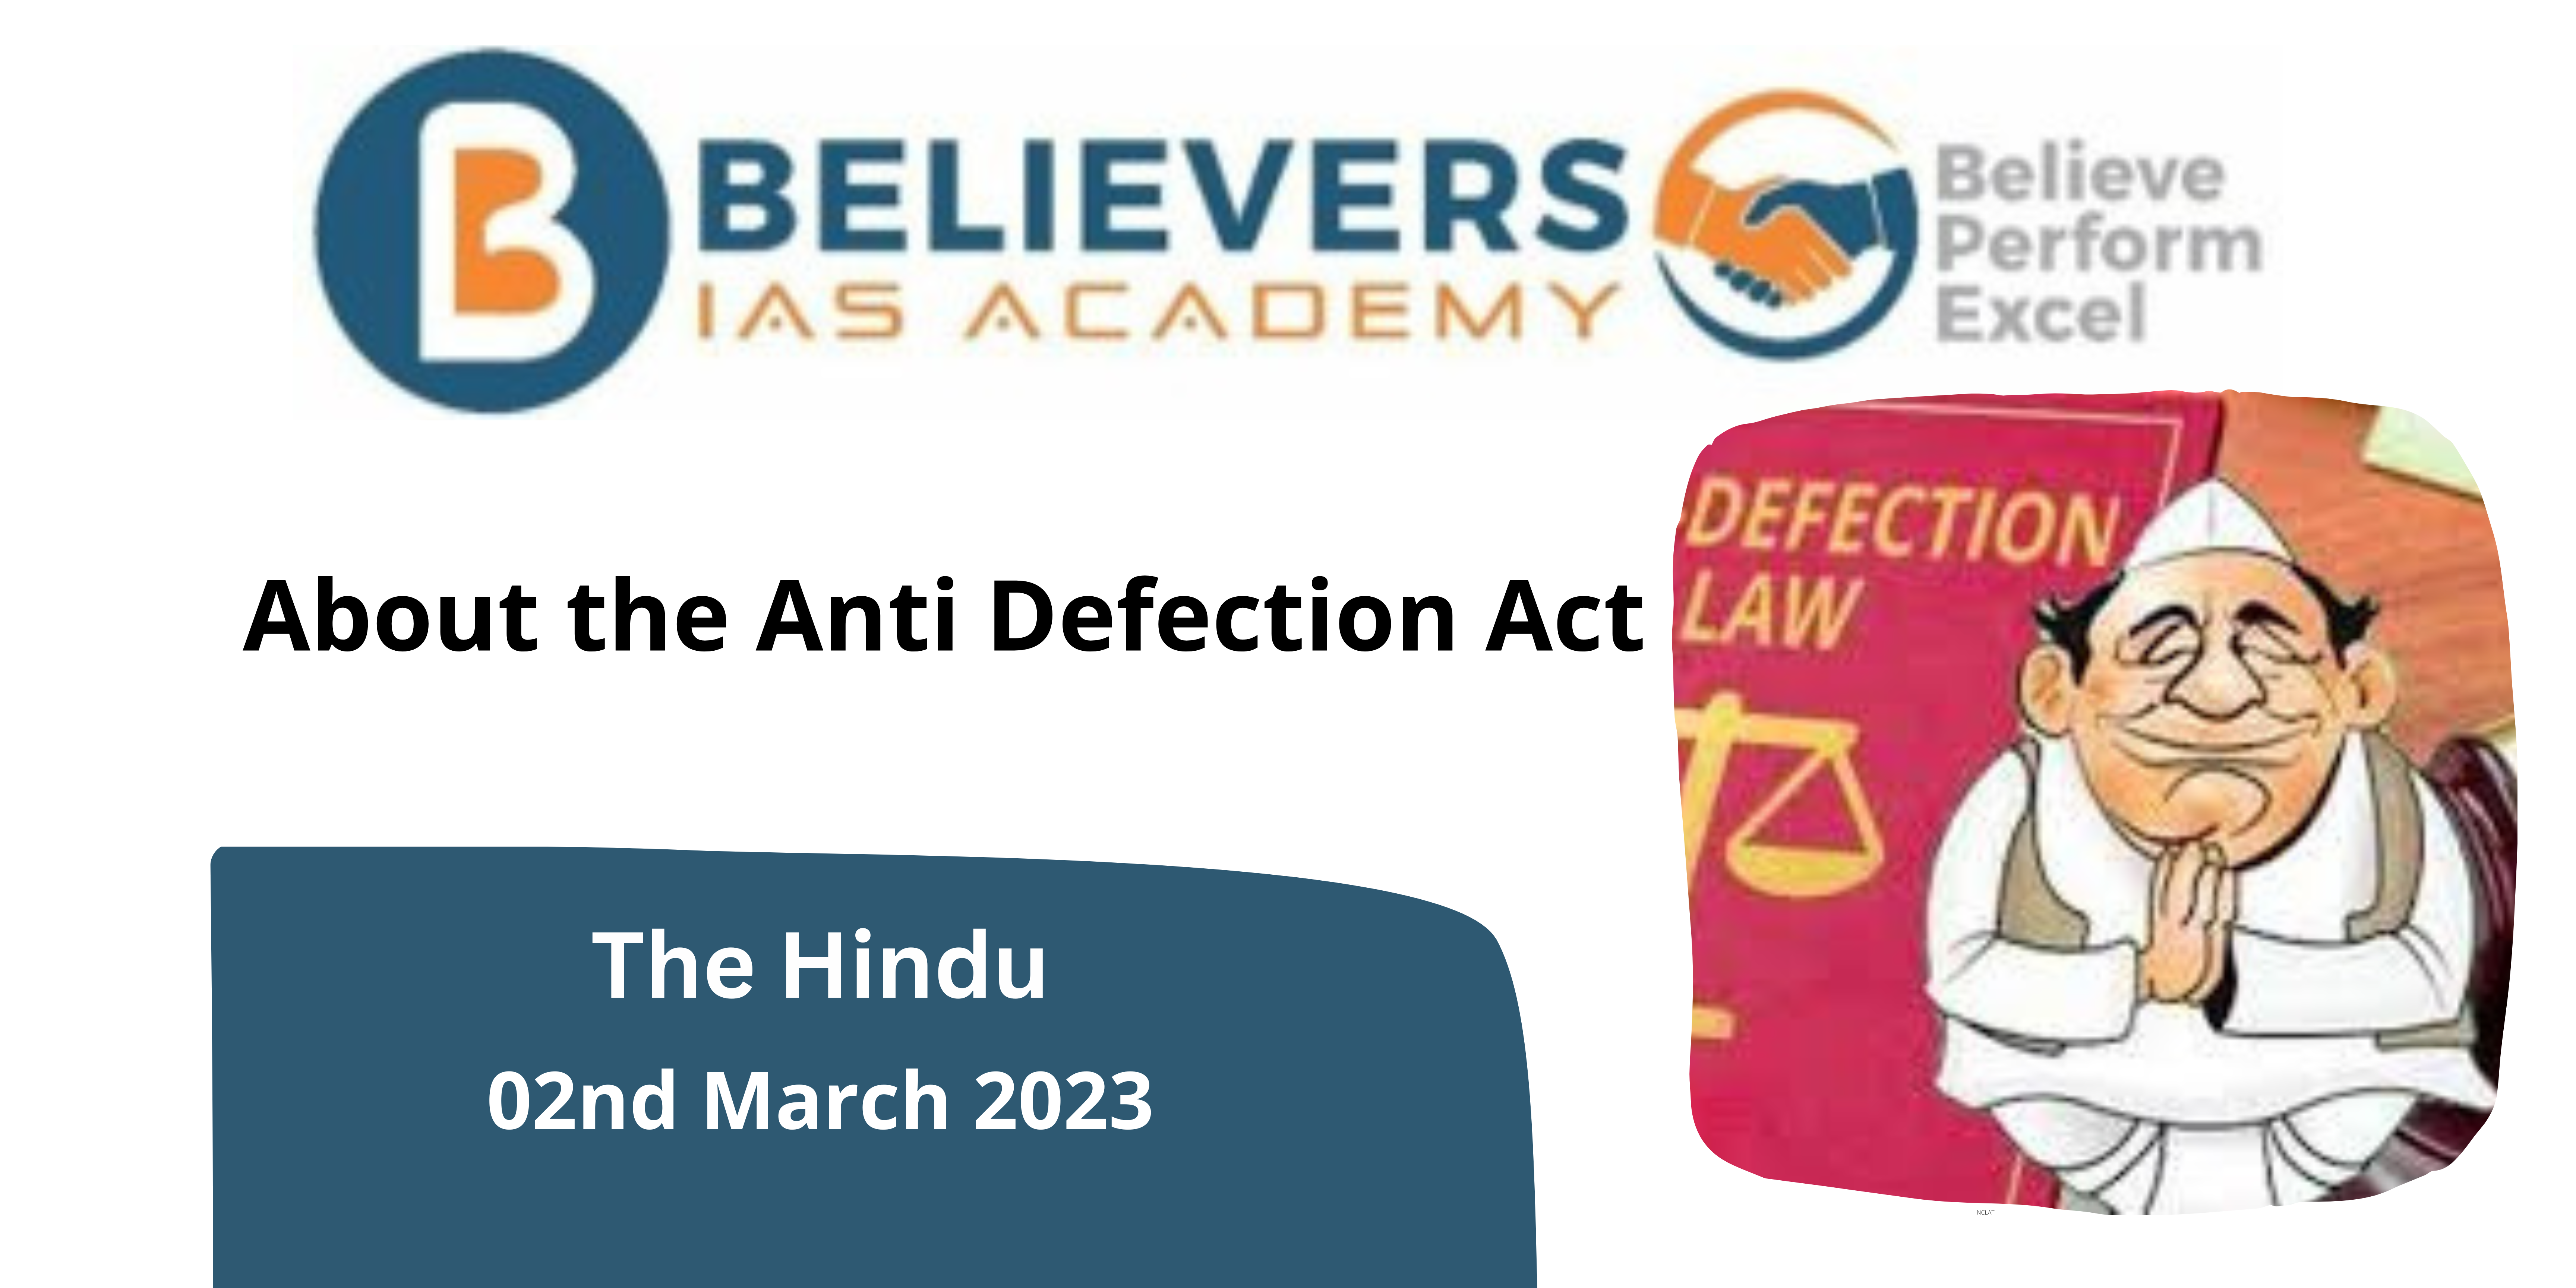 About the Anti Defection Act